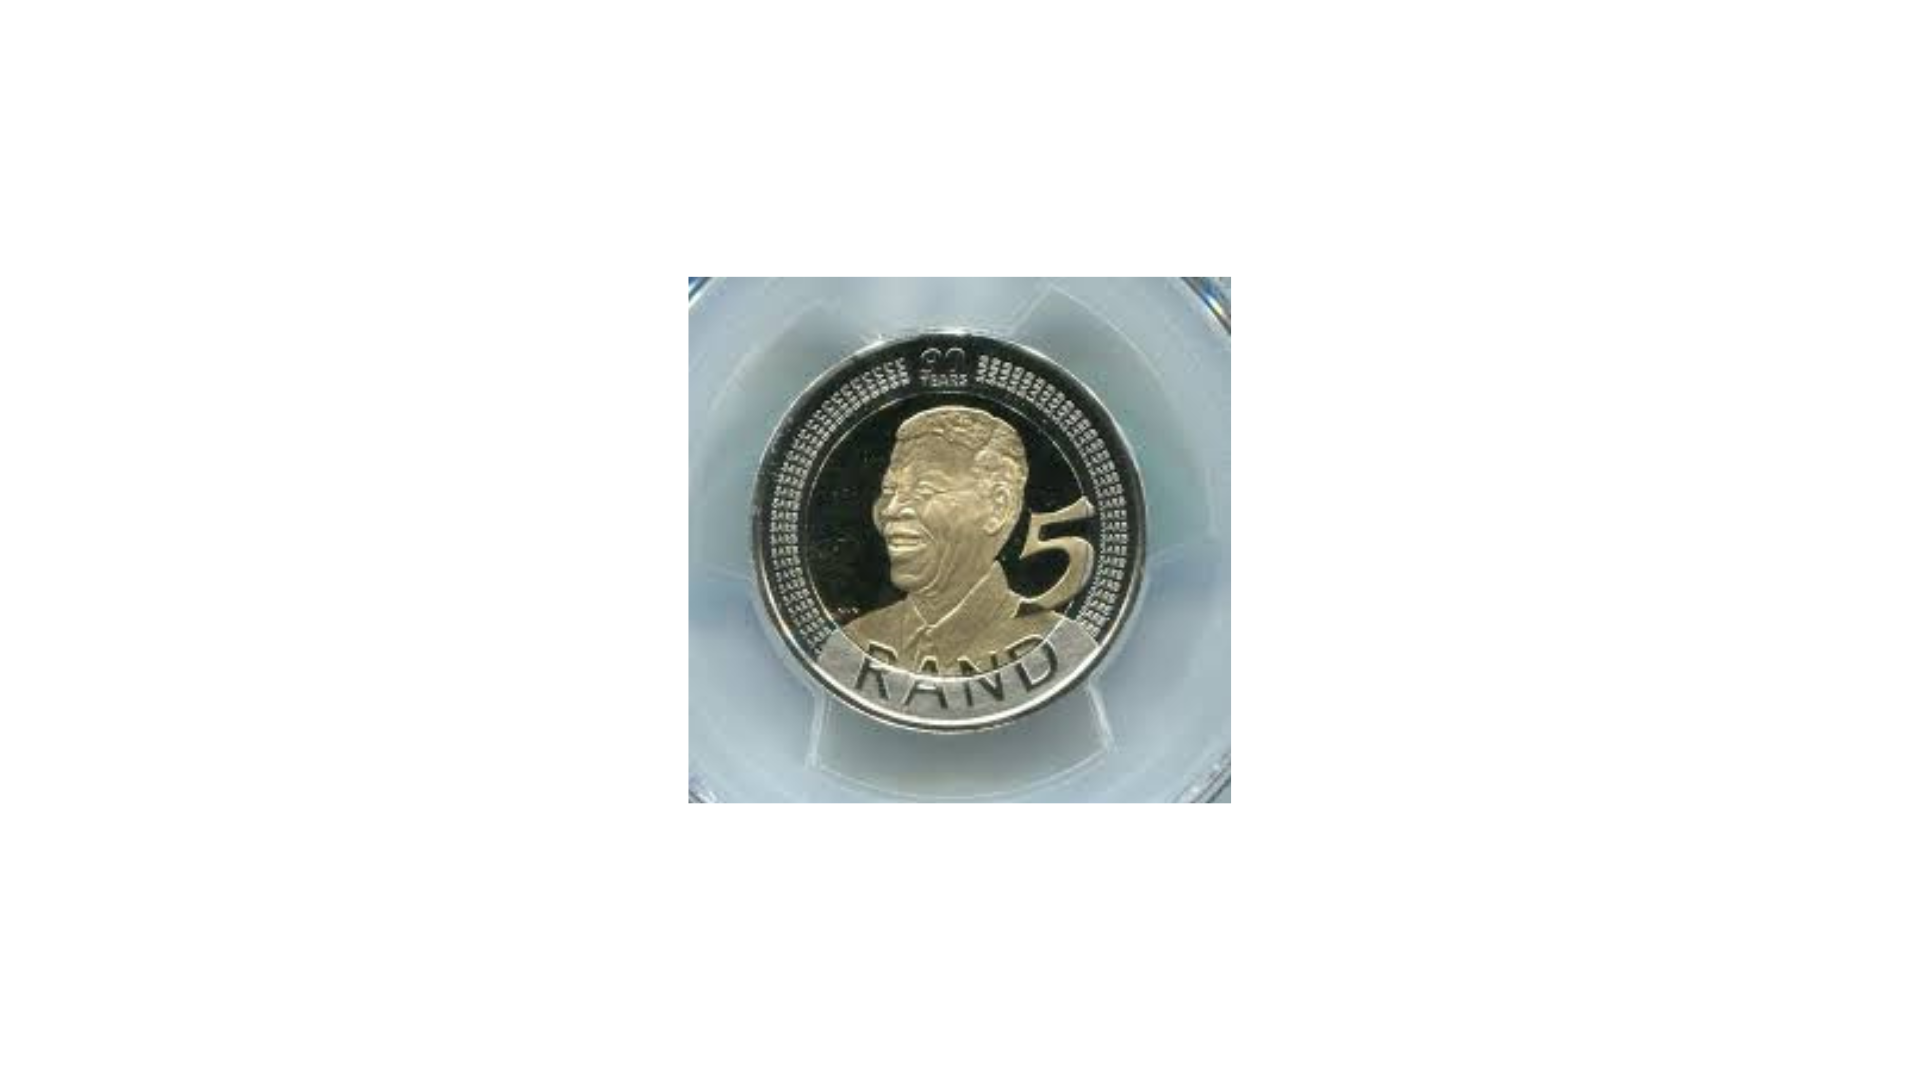 Where to Sell your Mandela Coins